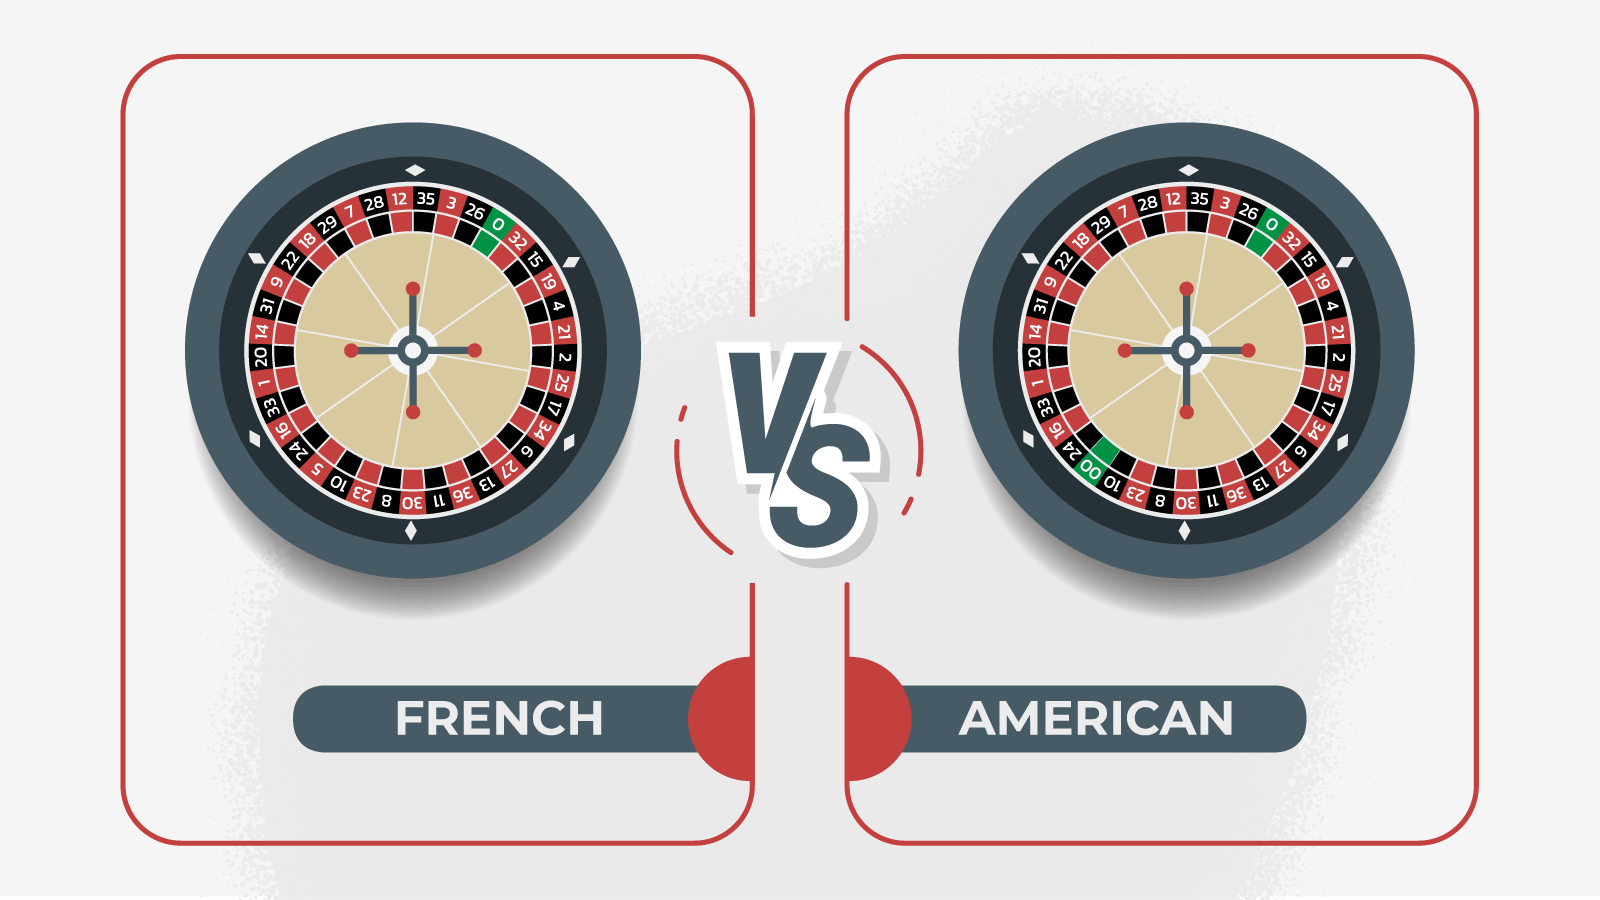 What is French Roulette